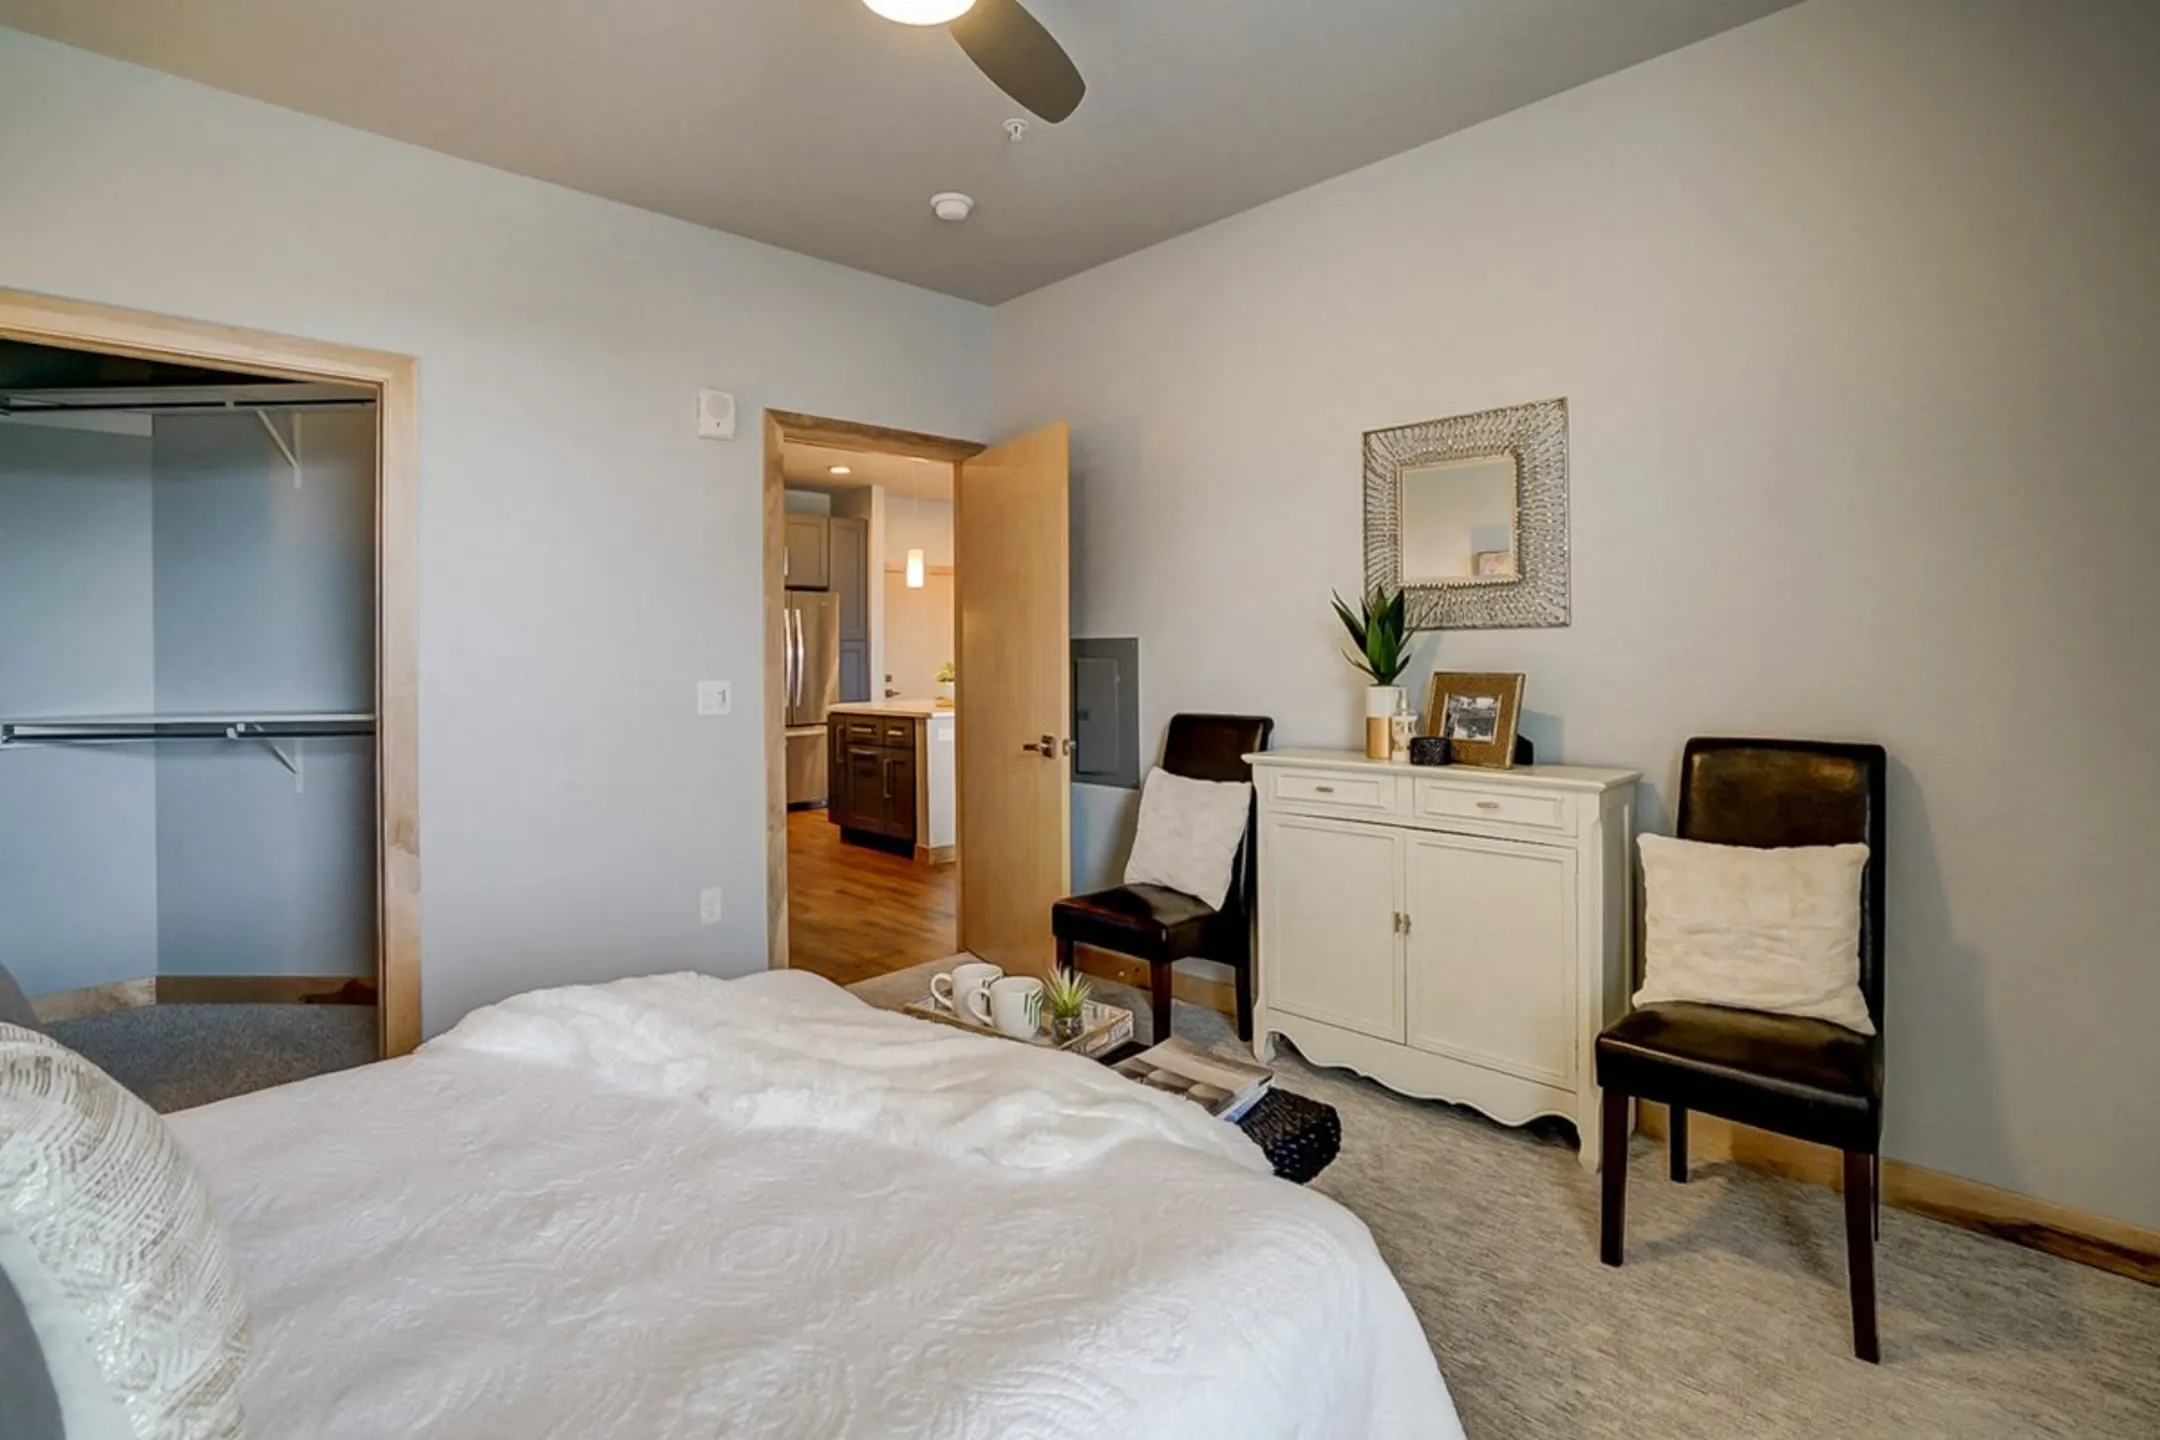 Bedroom - Fusion at 841 - Madison, WI